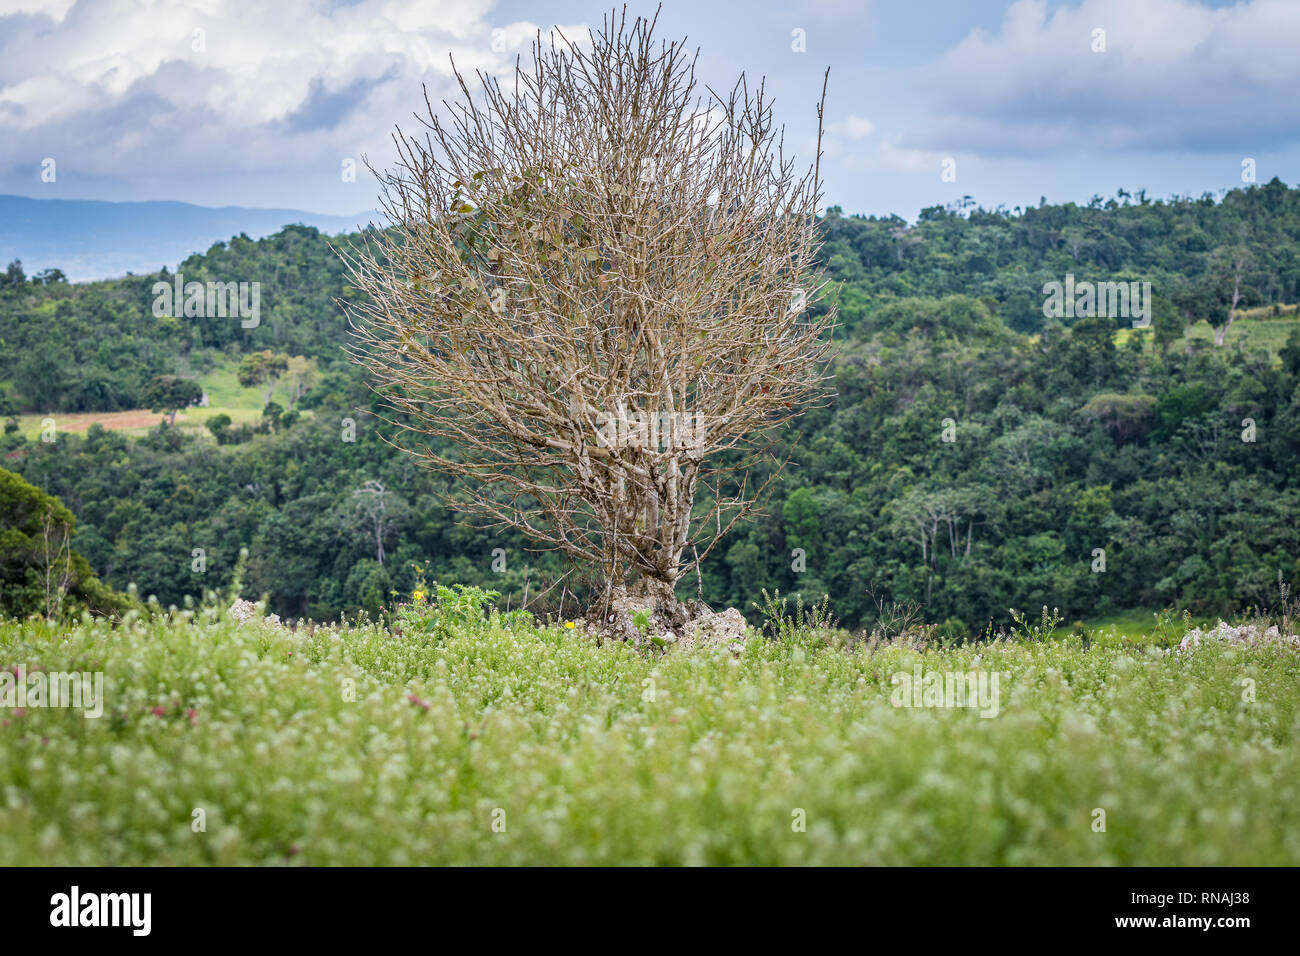 Dry and almost leafless tree in countryside meadow surrounded by lush green plants and trees. Stock Photo